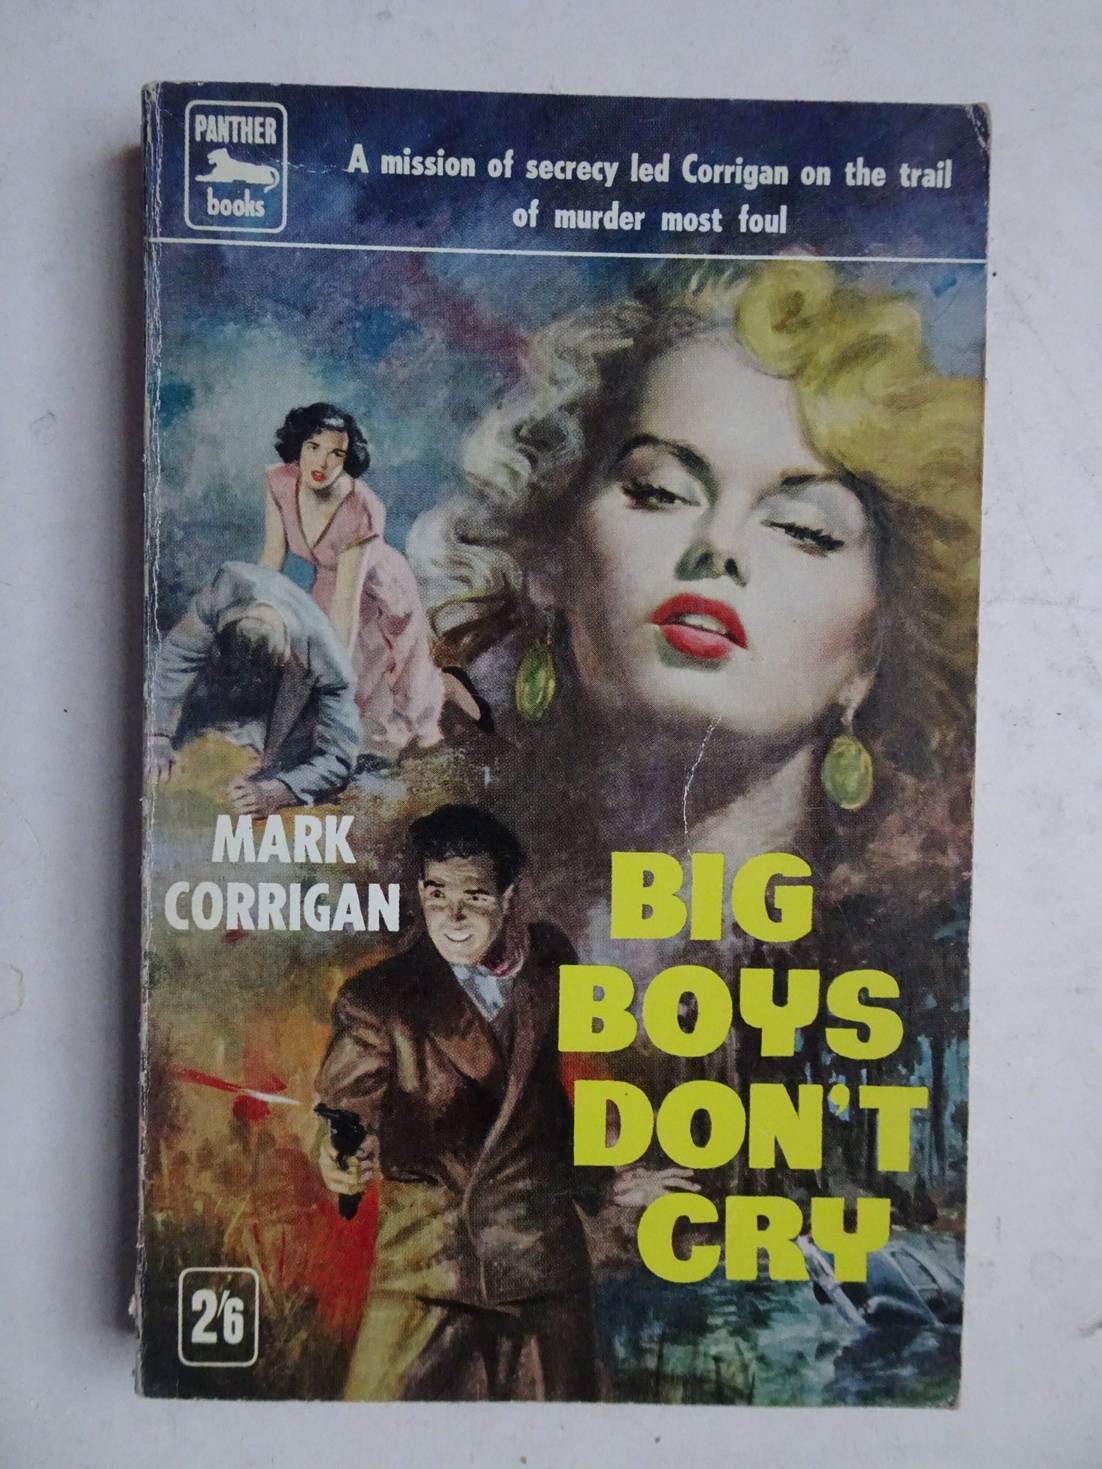 Corrigan, Mark. - Big boys don't cry. A mission of secrecy led Corrigan on the trail of murder most foul.